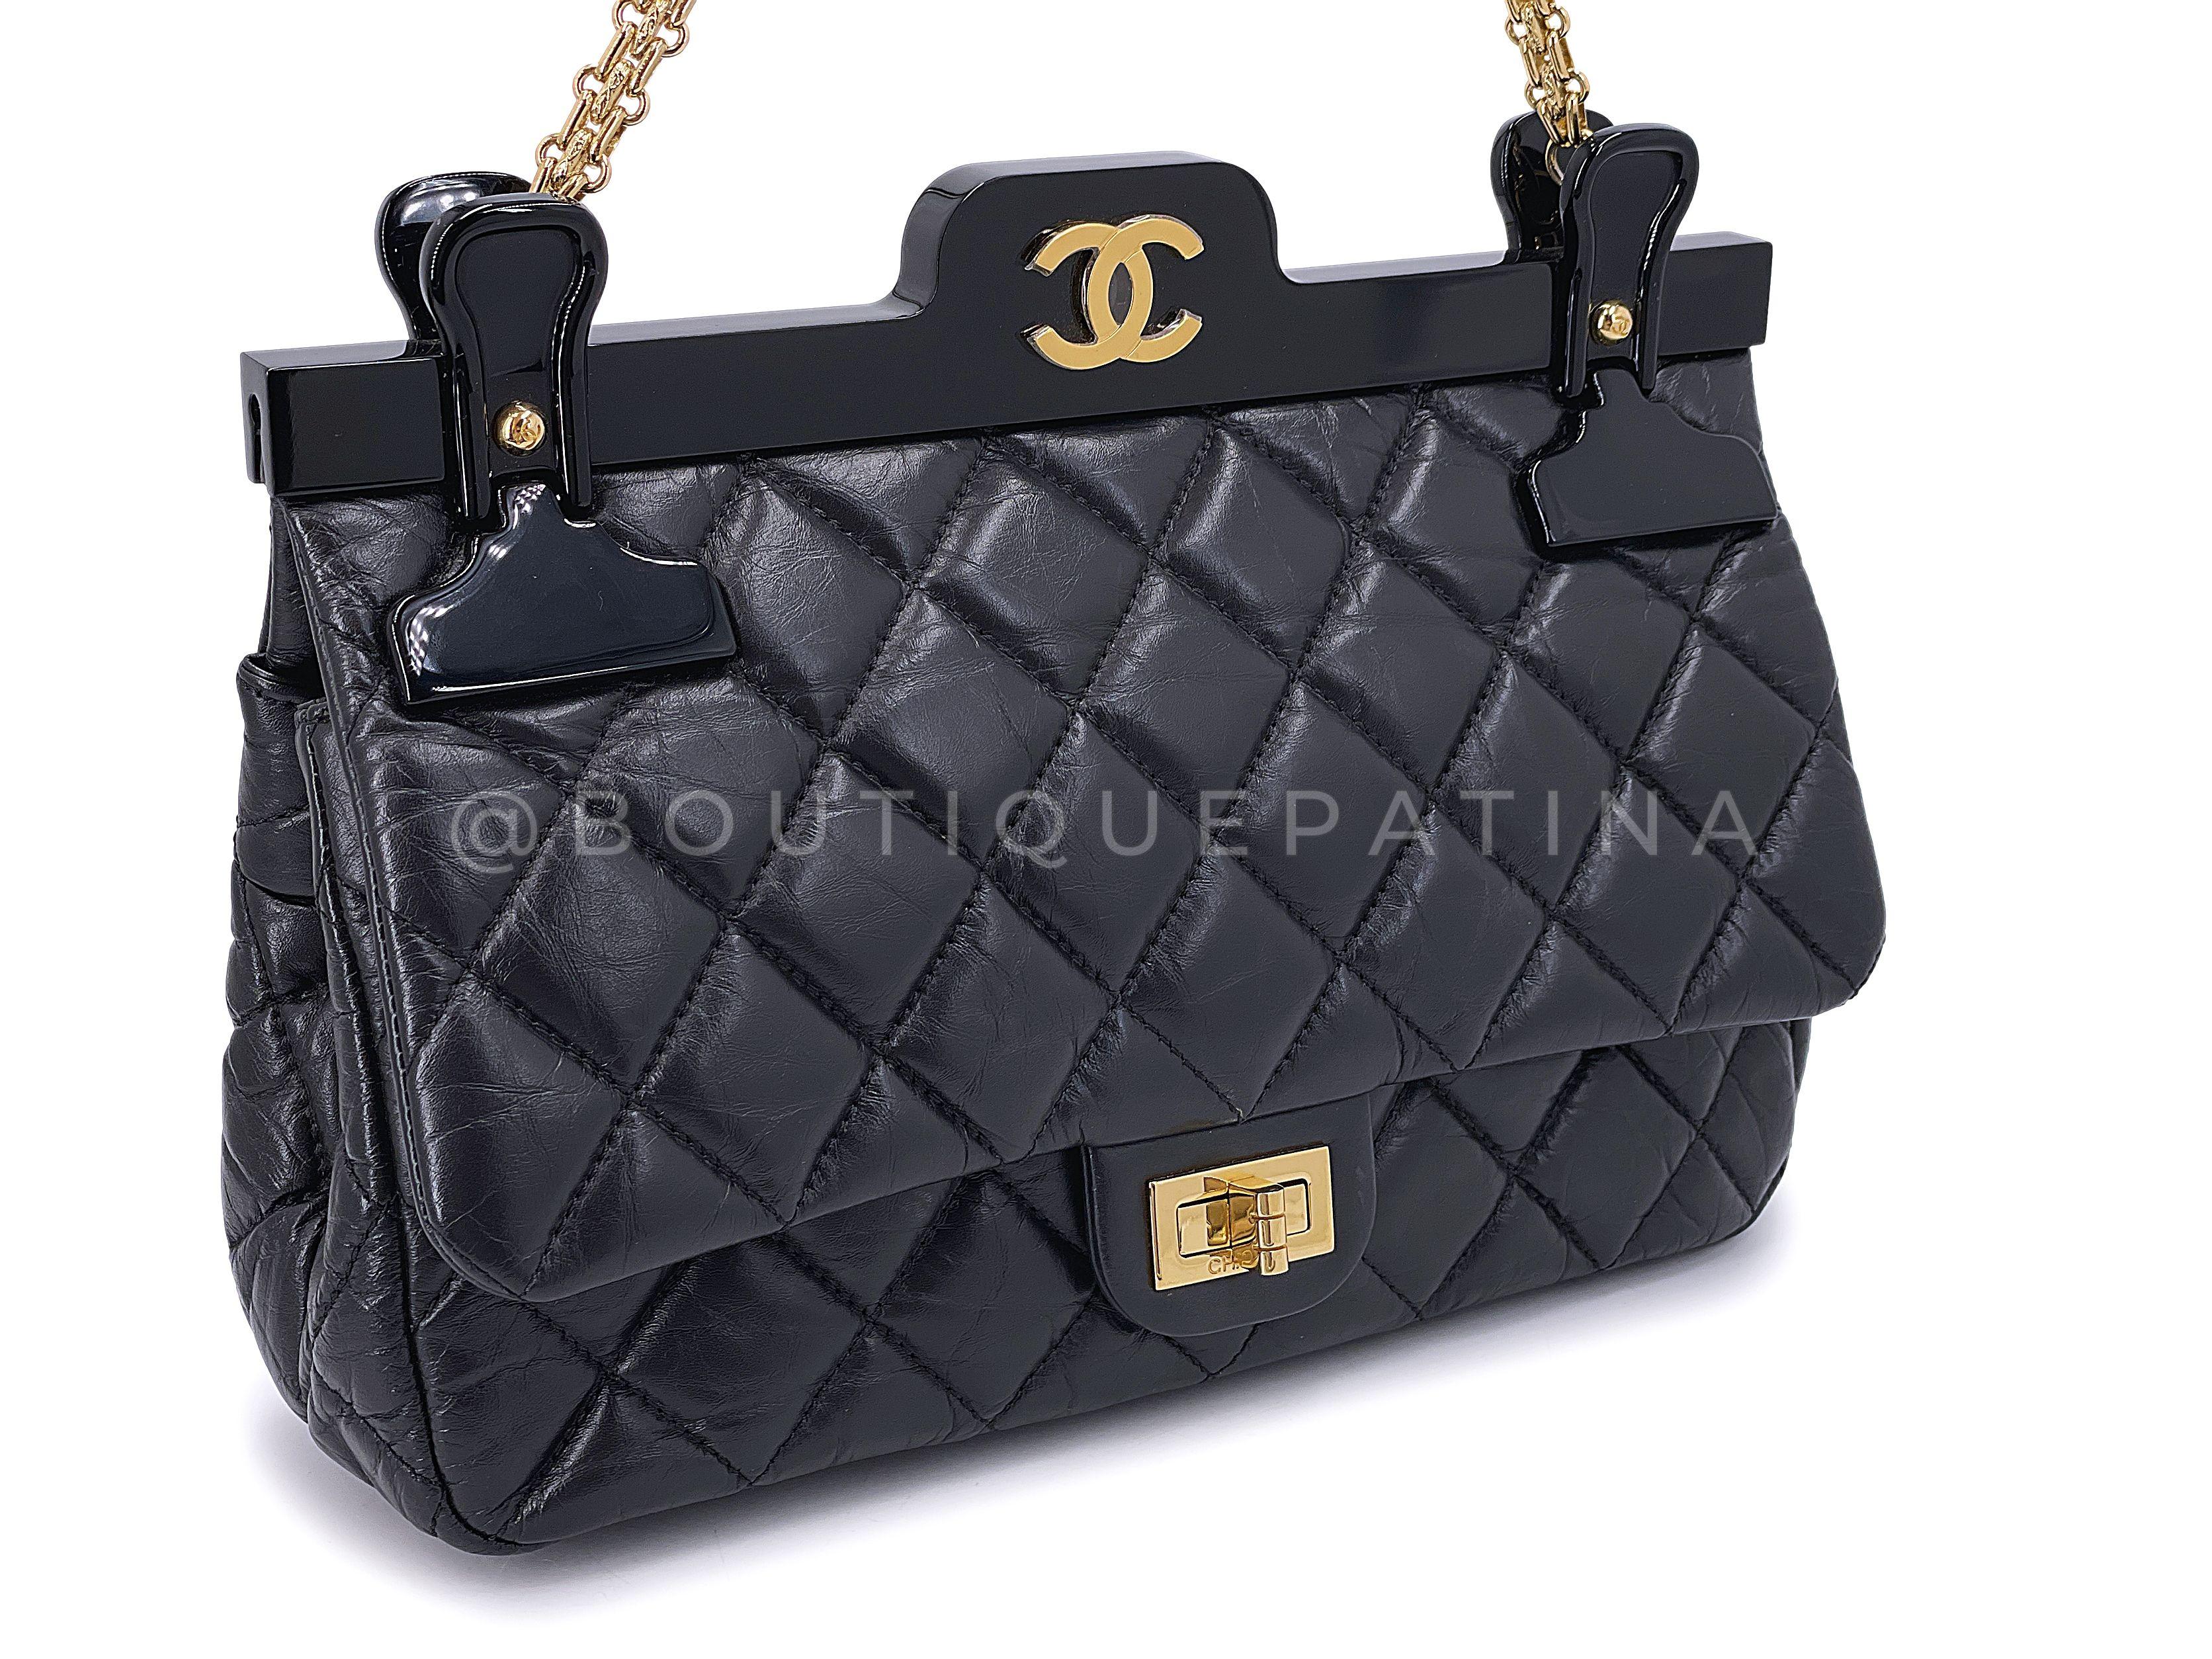 Store item: 67964
This Rare Chanel 2016 